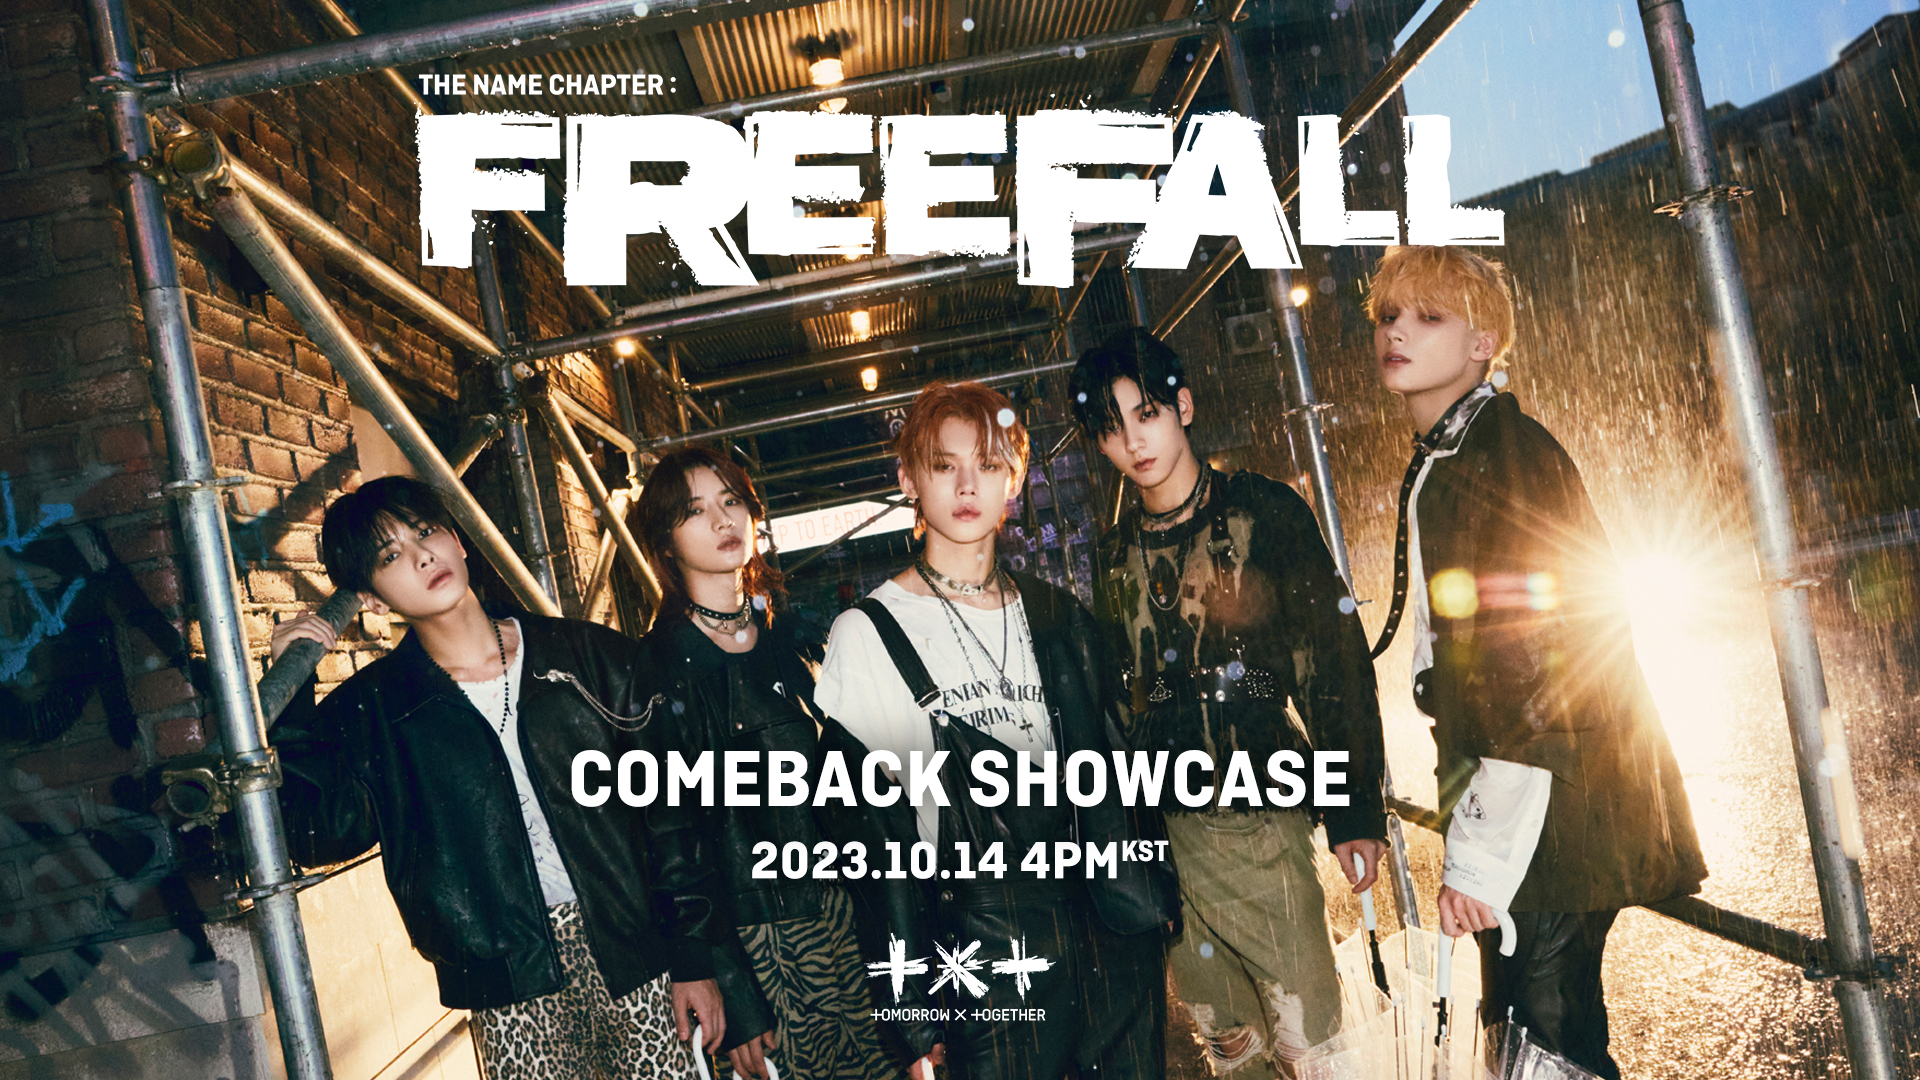 TOMORROW X TOGETHER 'The Name Chapter: FREEFALL' COMEBACK SHOWCASE